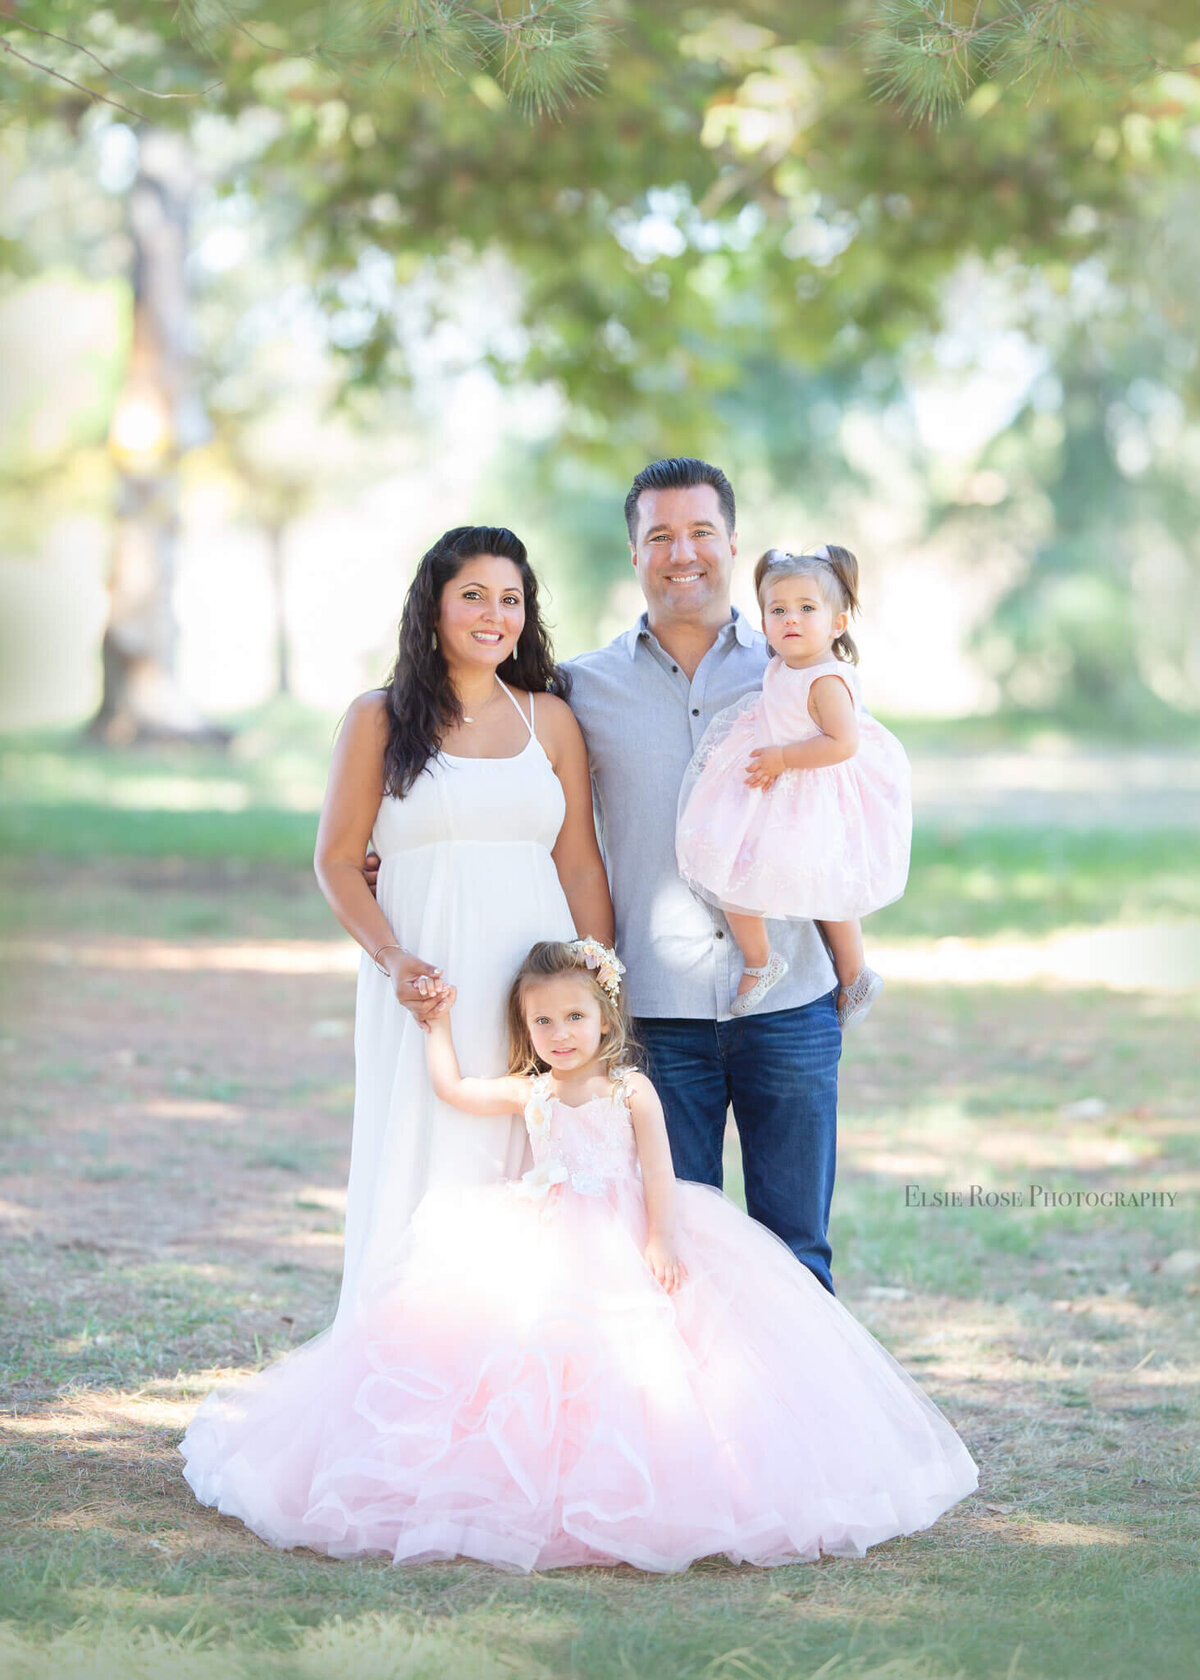 Family of 4 at Lake Balboa Park photographed by Elsie Rose Photography